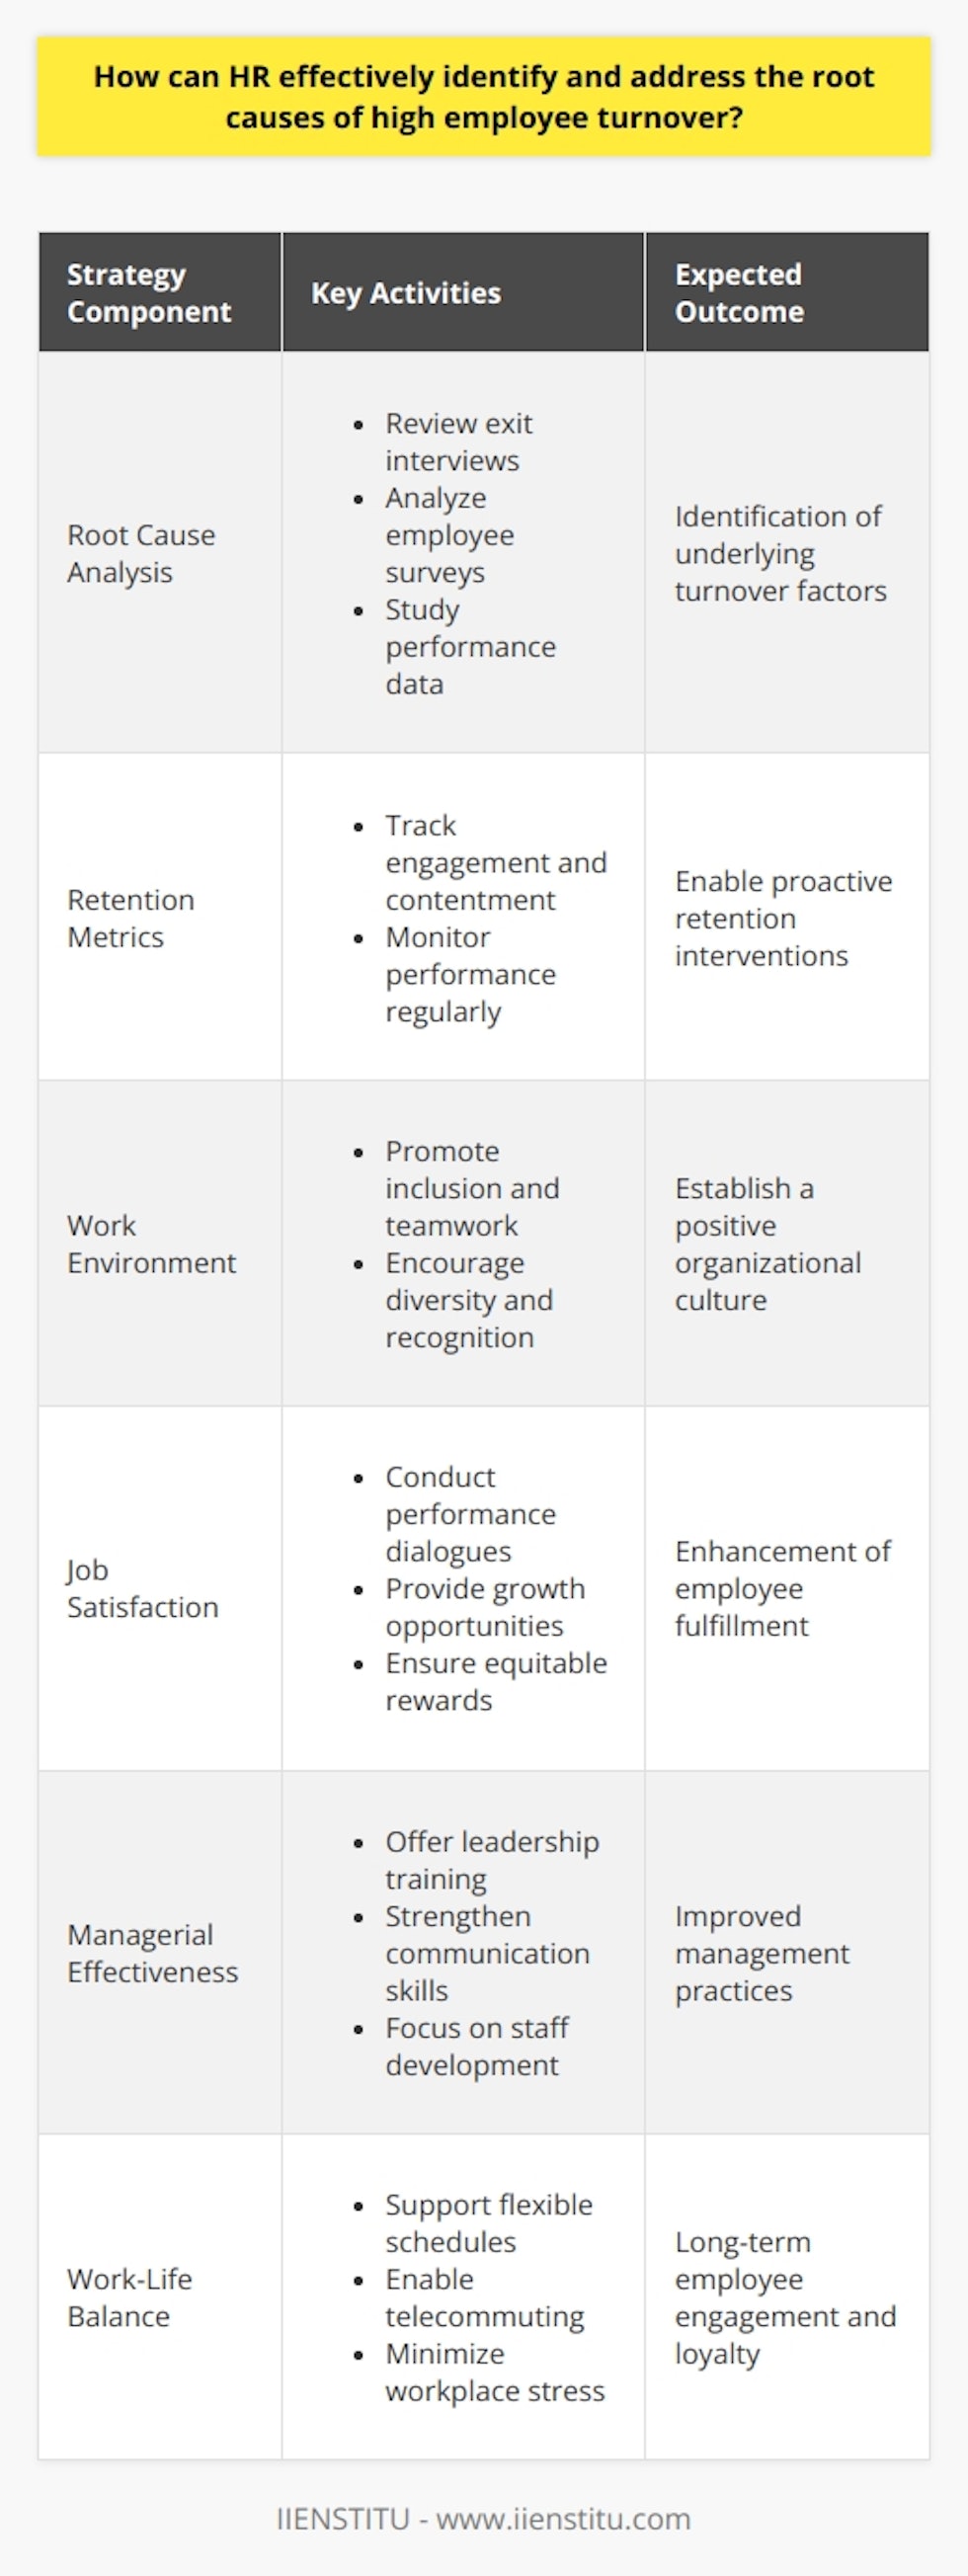 High employee turnover is a pressing issue for many organizations, leading to increased costs and decreased productivity. HR professionals can combat this challenge by conducting a meticulous Root Cause Analysis to pinpoint the underlying factors contributing to turnover. This process involves a detailed review of exit interviews, employee surveys, and performance data. Institutionalizing Employee Retention Metrics is paramount. HR must rigorously track parameters such as engagement, job contentment, and performance. This monitoring reveals trends and triggers proactive interventions before turnover escalates.Work Environment is a critical turnover influencer. A toxic or unsupportive culture can drive employees away. HR must partner with leadership to cultivate a nurturing environment that embraces diversity, inclusion, teamwork, and recognition. These efforts can forge a stronger, more loyal workforce.Job Satisfaction cannot be overlooked. HR has to continuously evaluate the emotional and professional fulfillment of positions within the company. Improving job satisfaction can be achieved through structured performance dialogues, opportunities for growth, and equitable reward mechanisms.Managerial Effectiveness is a key pillar in combating turnover. HR's role is to empower managers with training focused on strong leadership, open communication, and staff development. Workshops on feedback delivery and engagement strategies can transform management practices.A pivotal aspect of retention that HR should champion is Work-Life Balance. Endorsing flexible schedules, telecommuting, and initiatives to minimize stress will make work more sustainable and employees more content and loyal.In summary, addressing high employee turnover demands a coherent strategy from HR, integrating comprehensive data analysis with tangible measures to enhance workplace culture, job satisfaction, management, and work-life balance. Through these multidimensional efforts, turnover can be substantially reduced, bolstering the organization's health and employee morale.